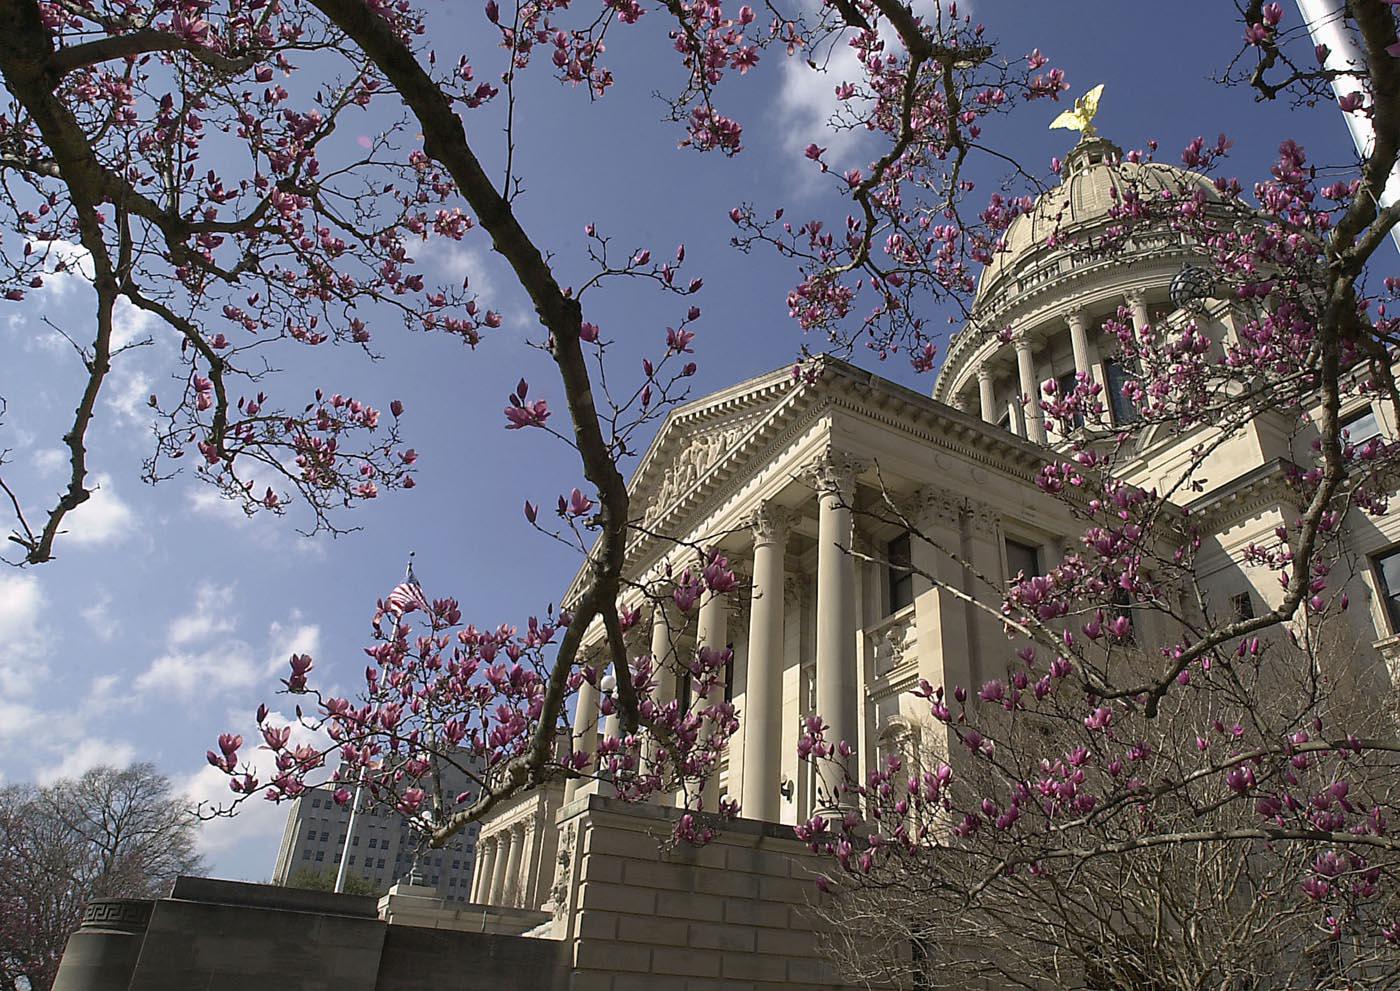 The Japanese Magnolia, also called saucer magnolia or tulip magnolia, features flowers that may reach 6 inches across in shades of pink to dark purple. The saucer magnolias pictured here provide a beautiful setting for the state Capitol.